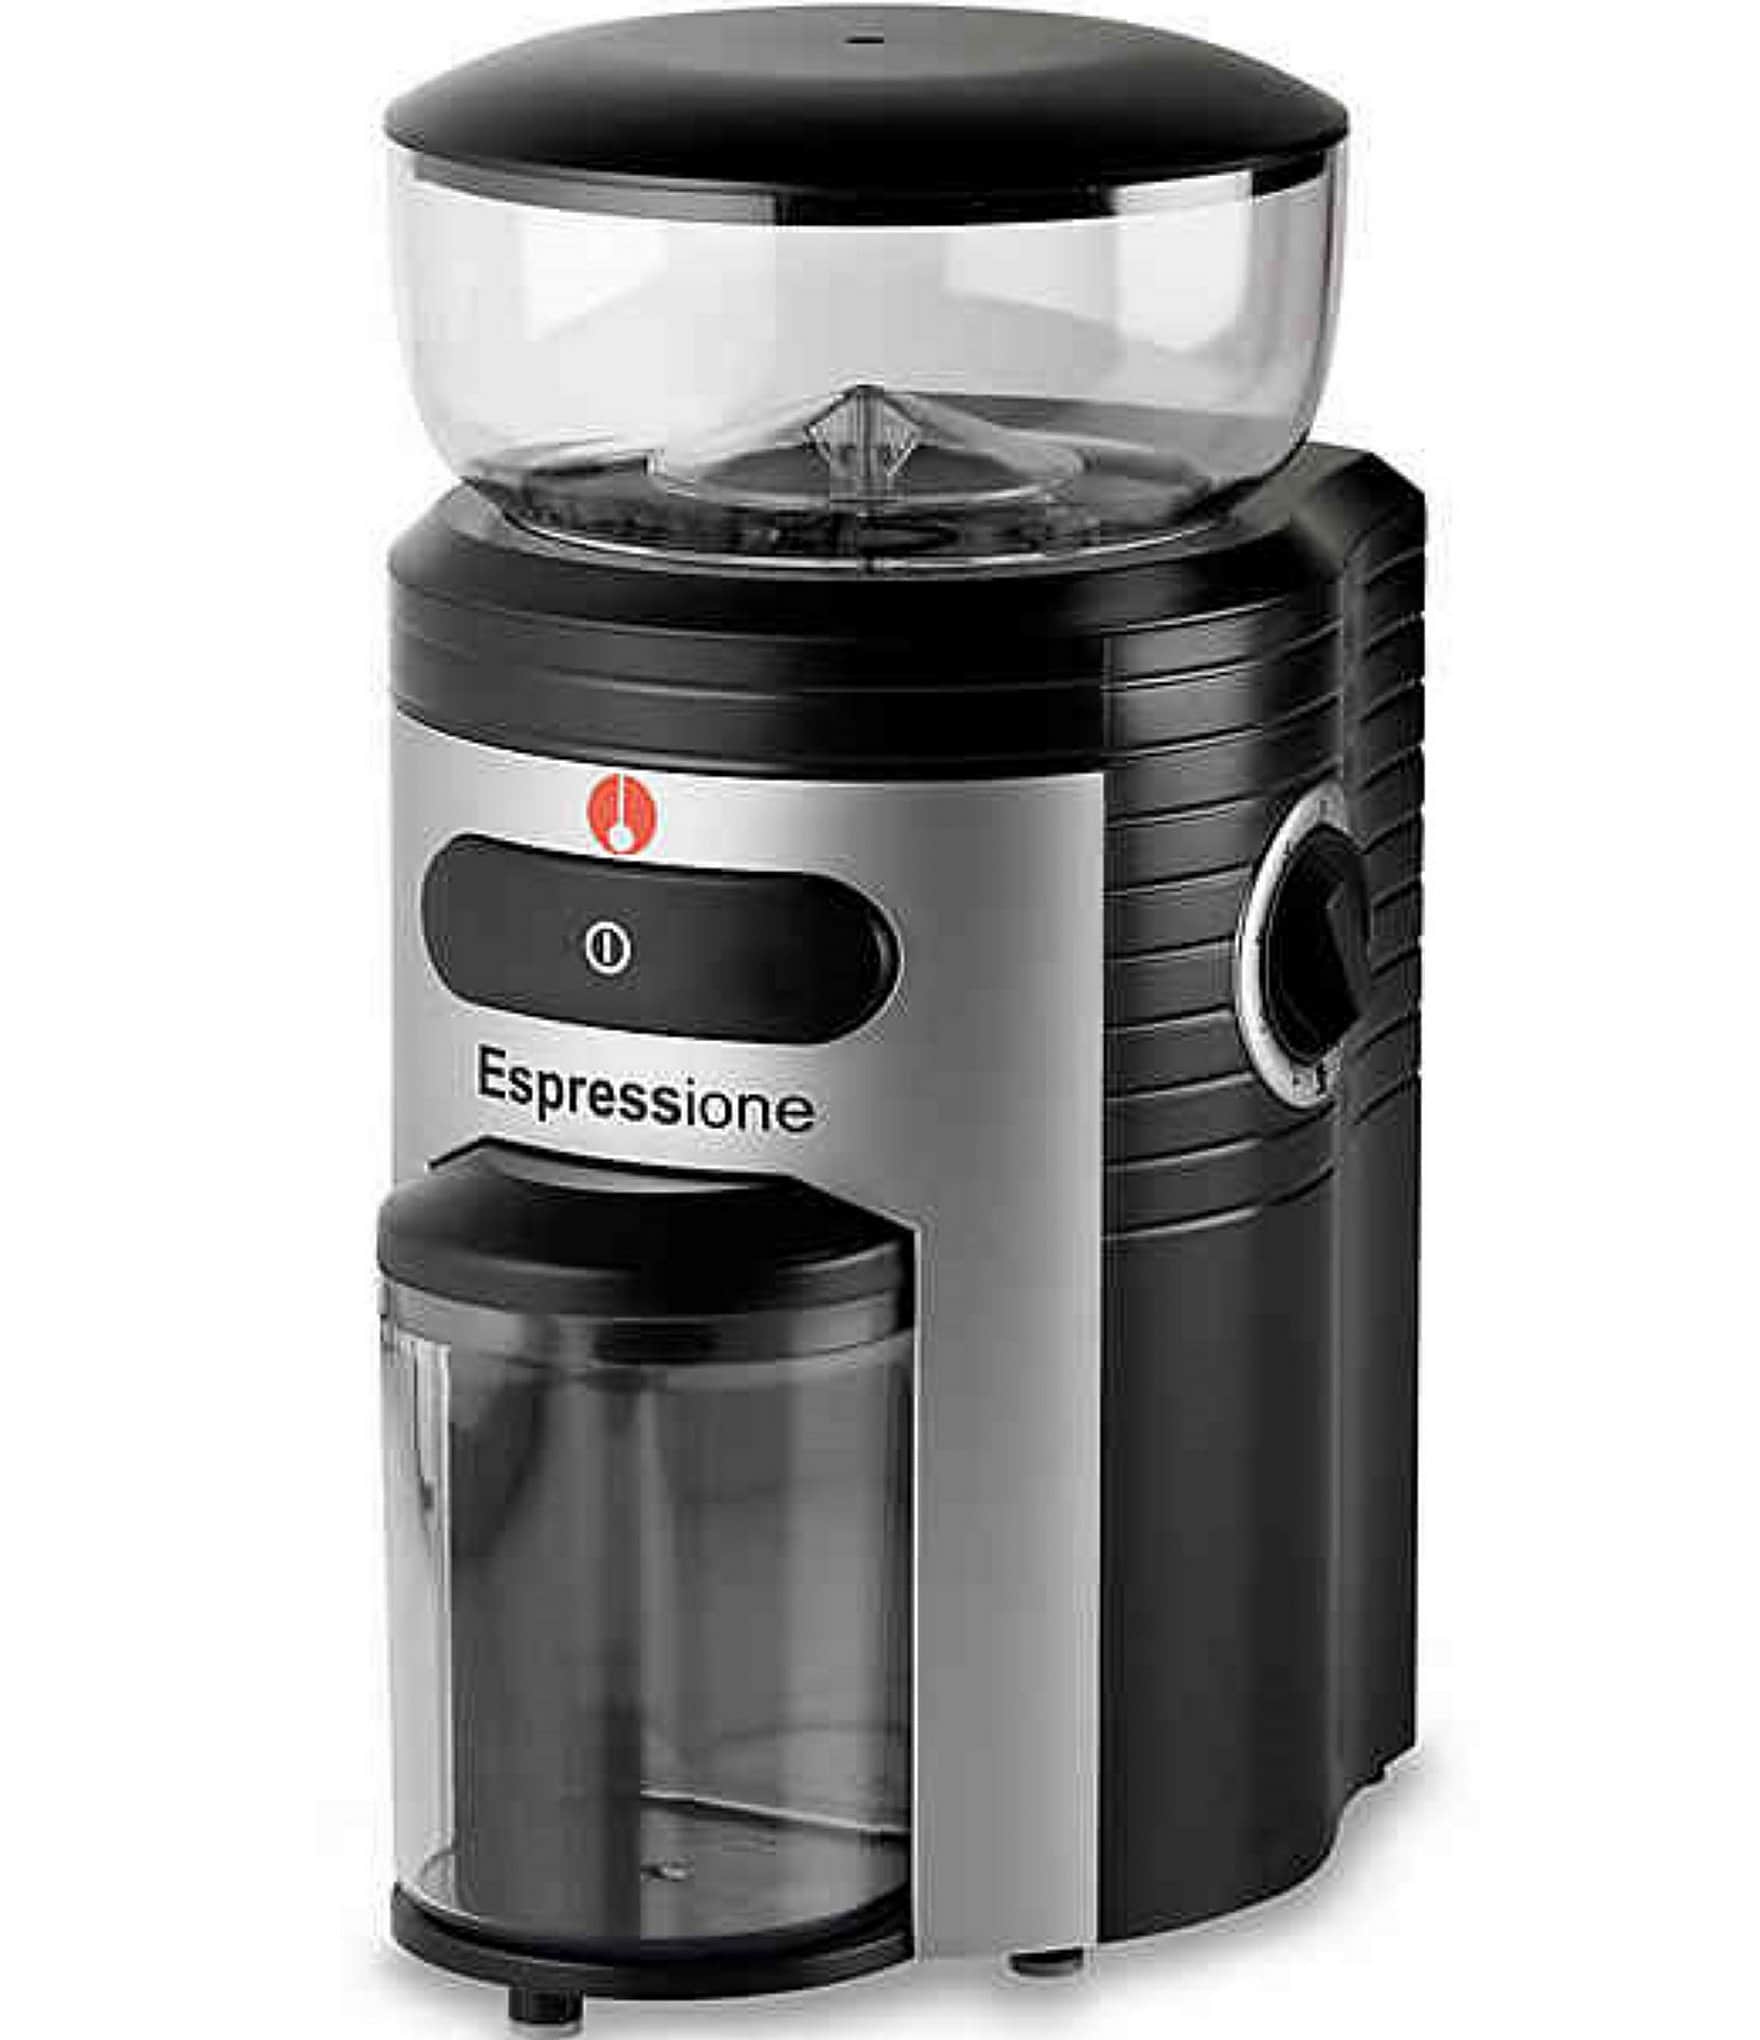 350 W Conical Burr Coffee Grinder, 1200g Commercial Espresso Coffee Grinder  - Heavy Duty Cast Aluminum Body/Extra Wide Dosing Capability (US Stock)